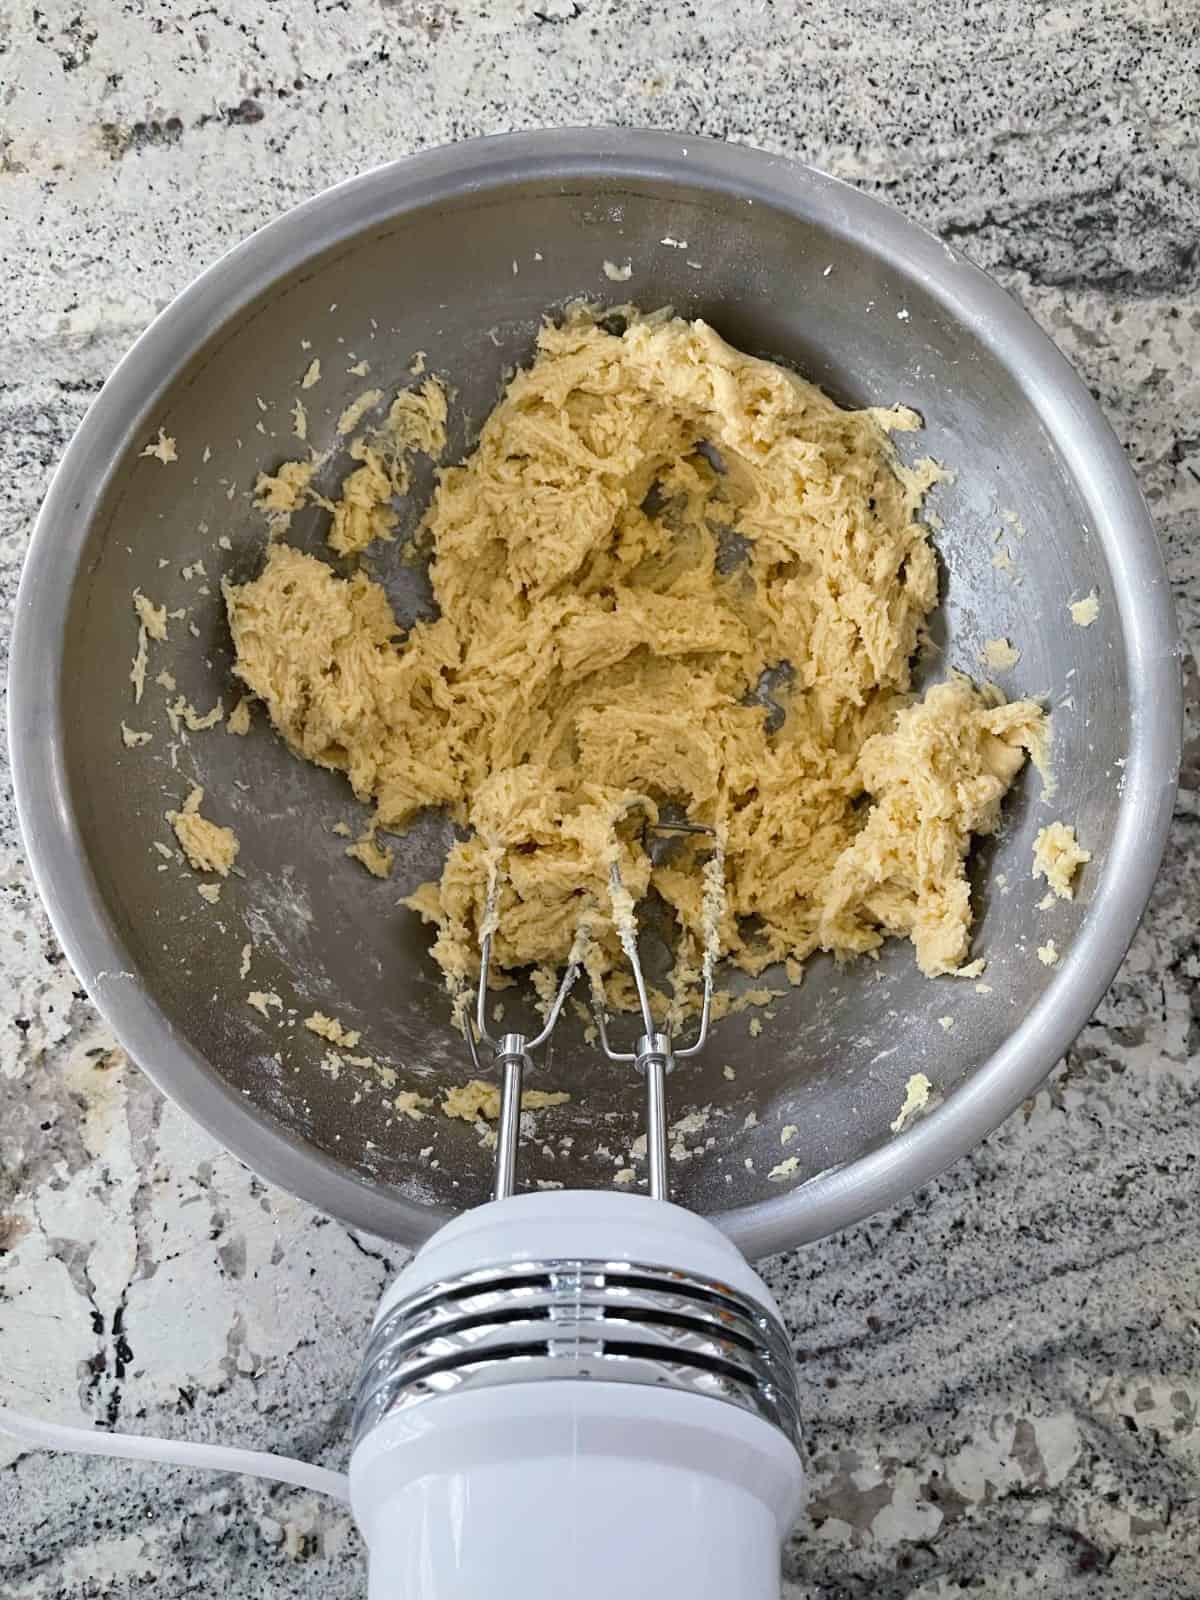 Beating coconut macaroon kiss cookie dough with electric mixer in stainless mixing bowl.